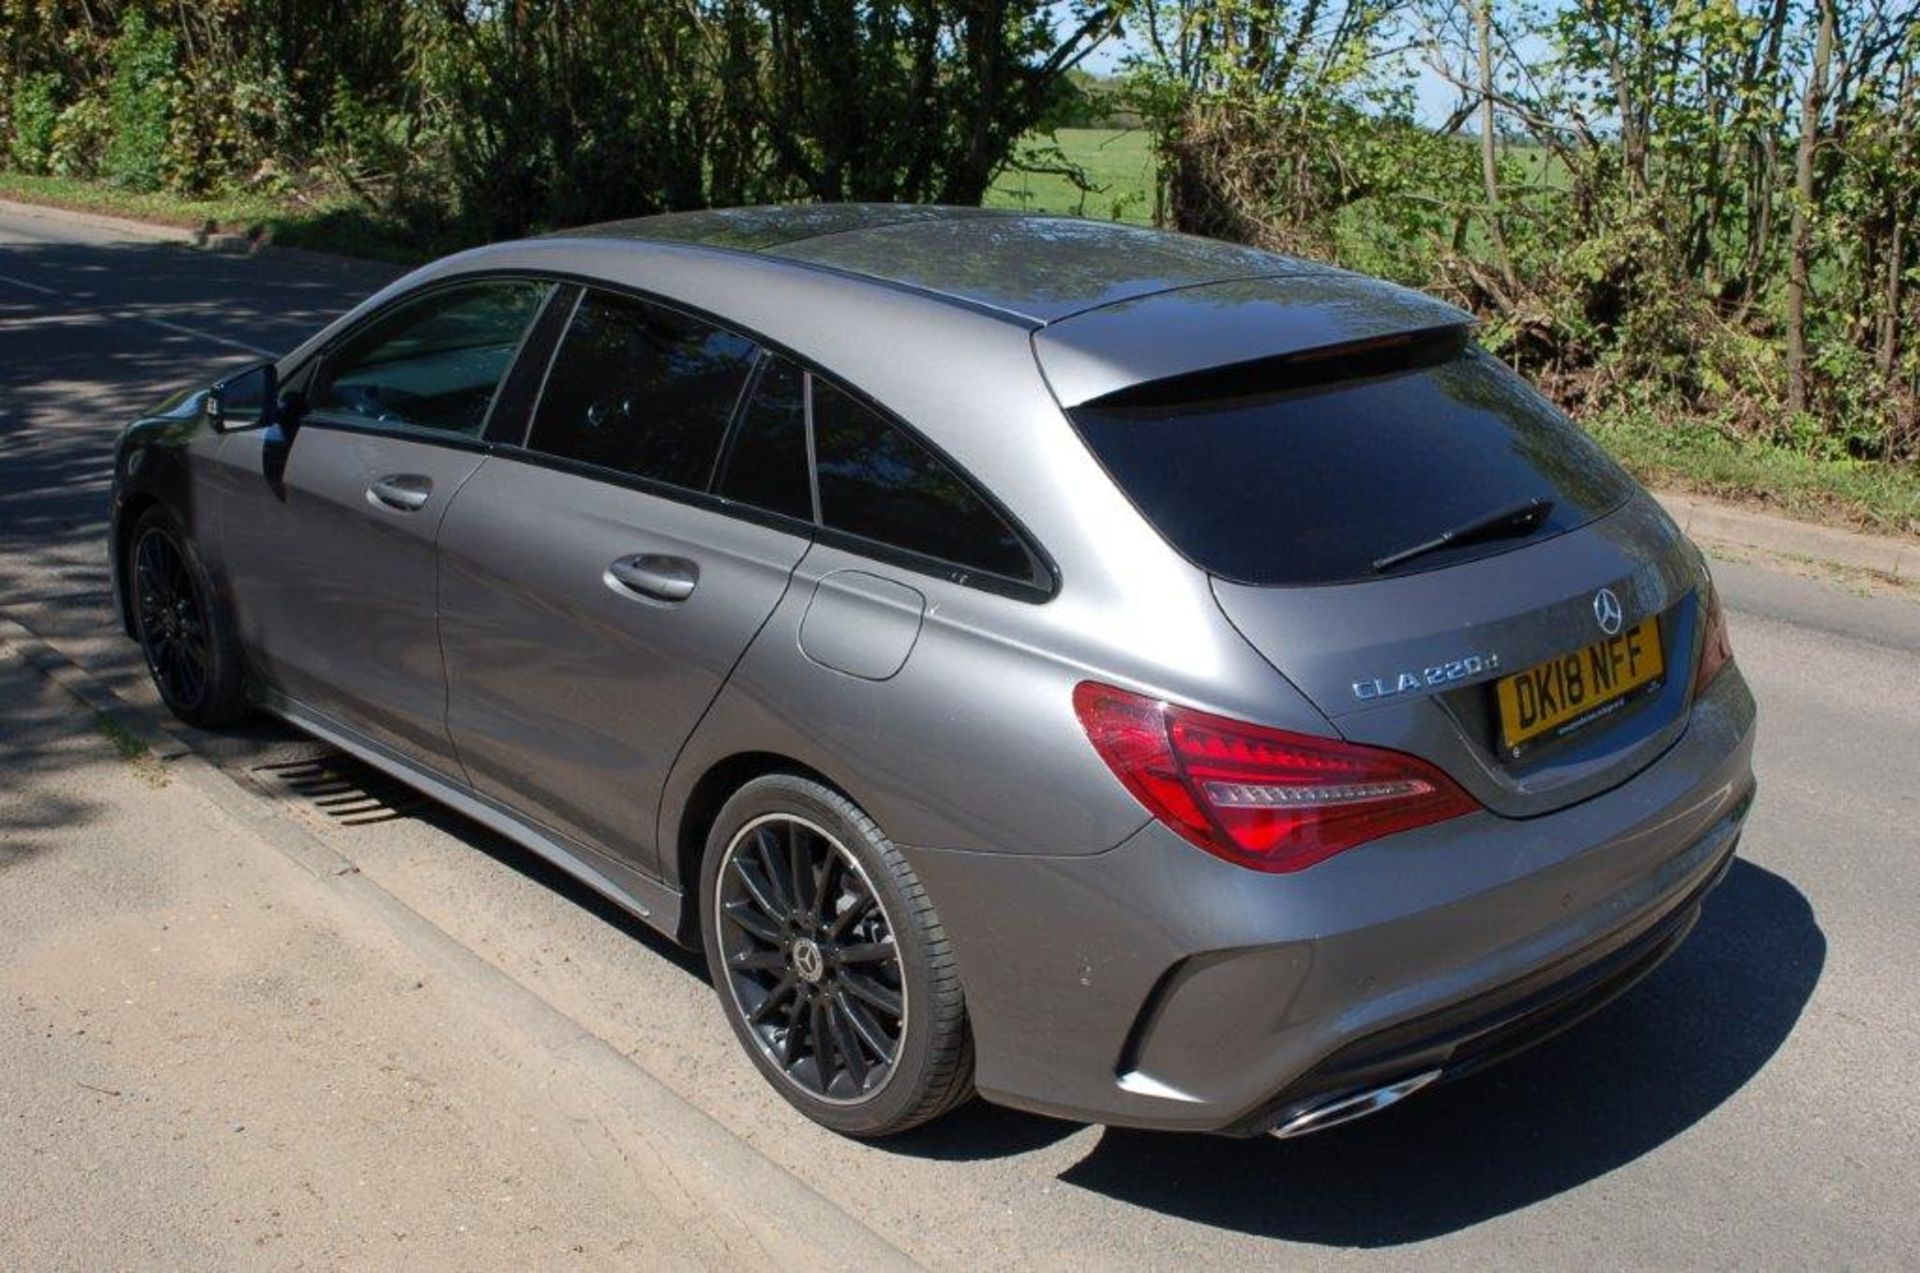 Mercedes Benz CLA 220 D AMG LINE AUTOMATIC DIESEL - Image 2 of 6